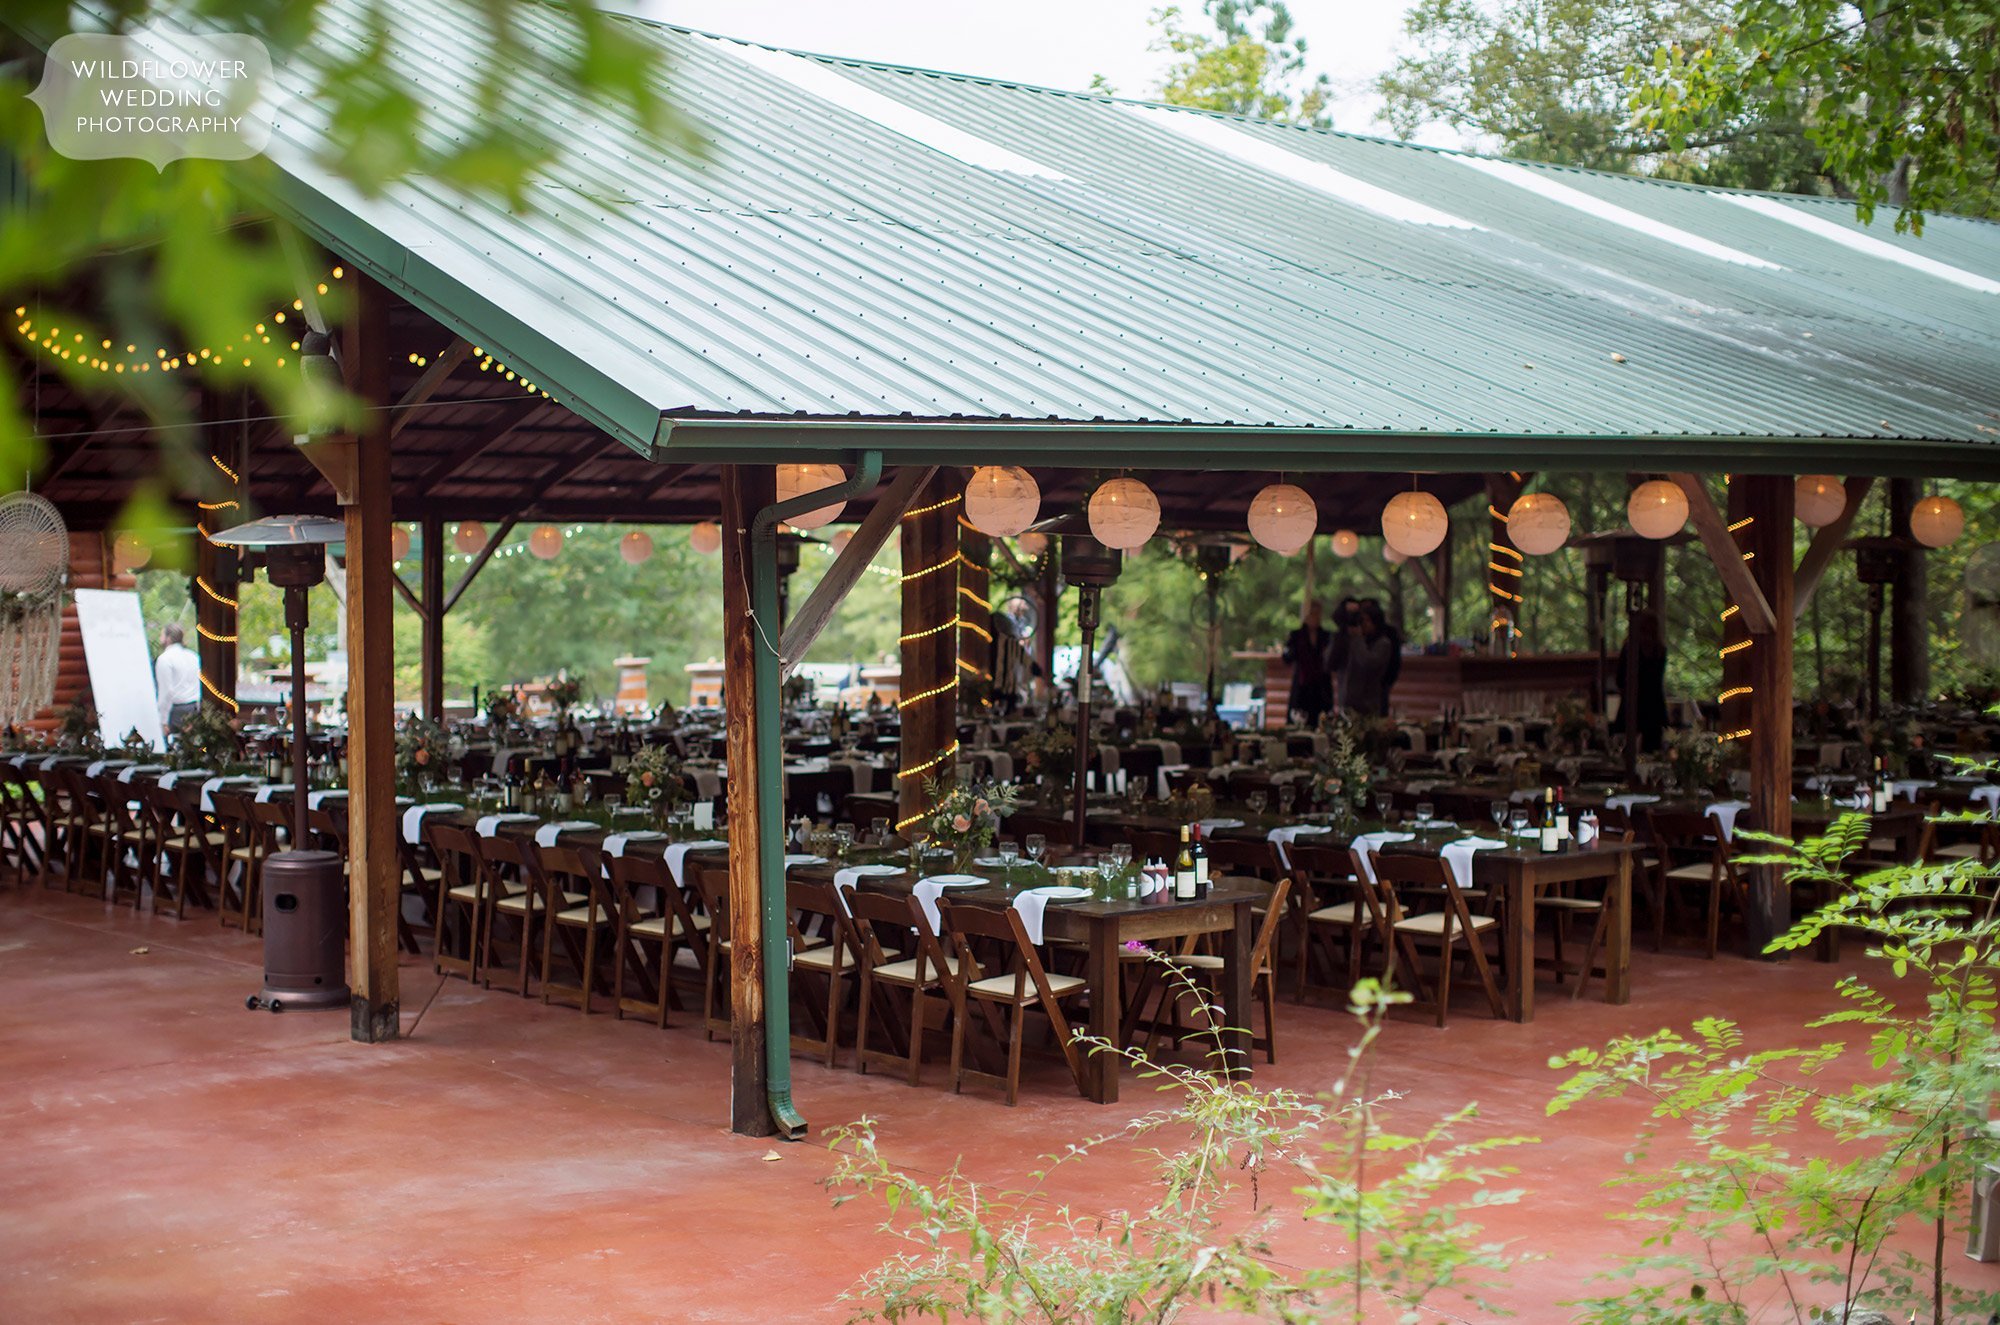 The Little Piney Lodge has a rustic covered pavilion for an outdoor wedding reception in Hermann, MO.